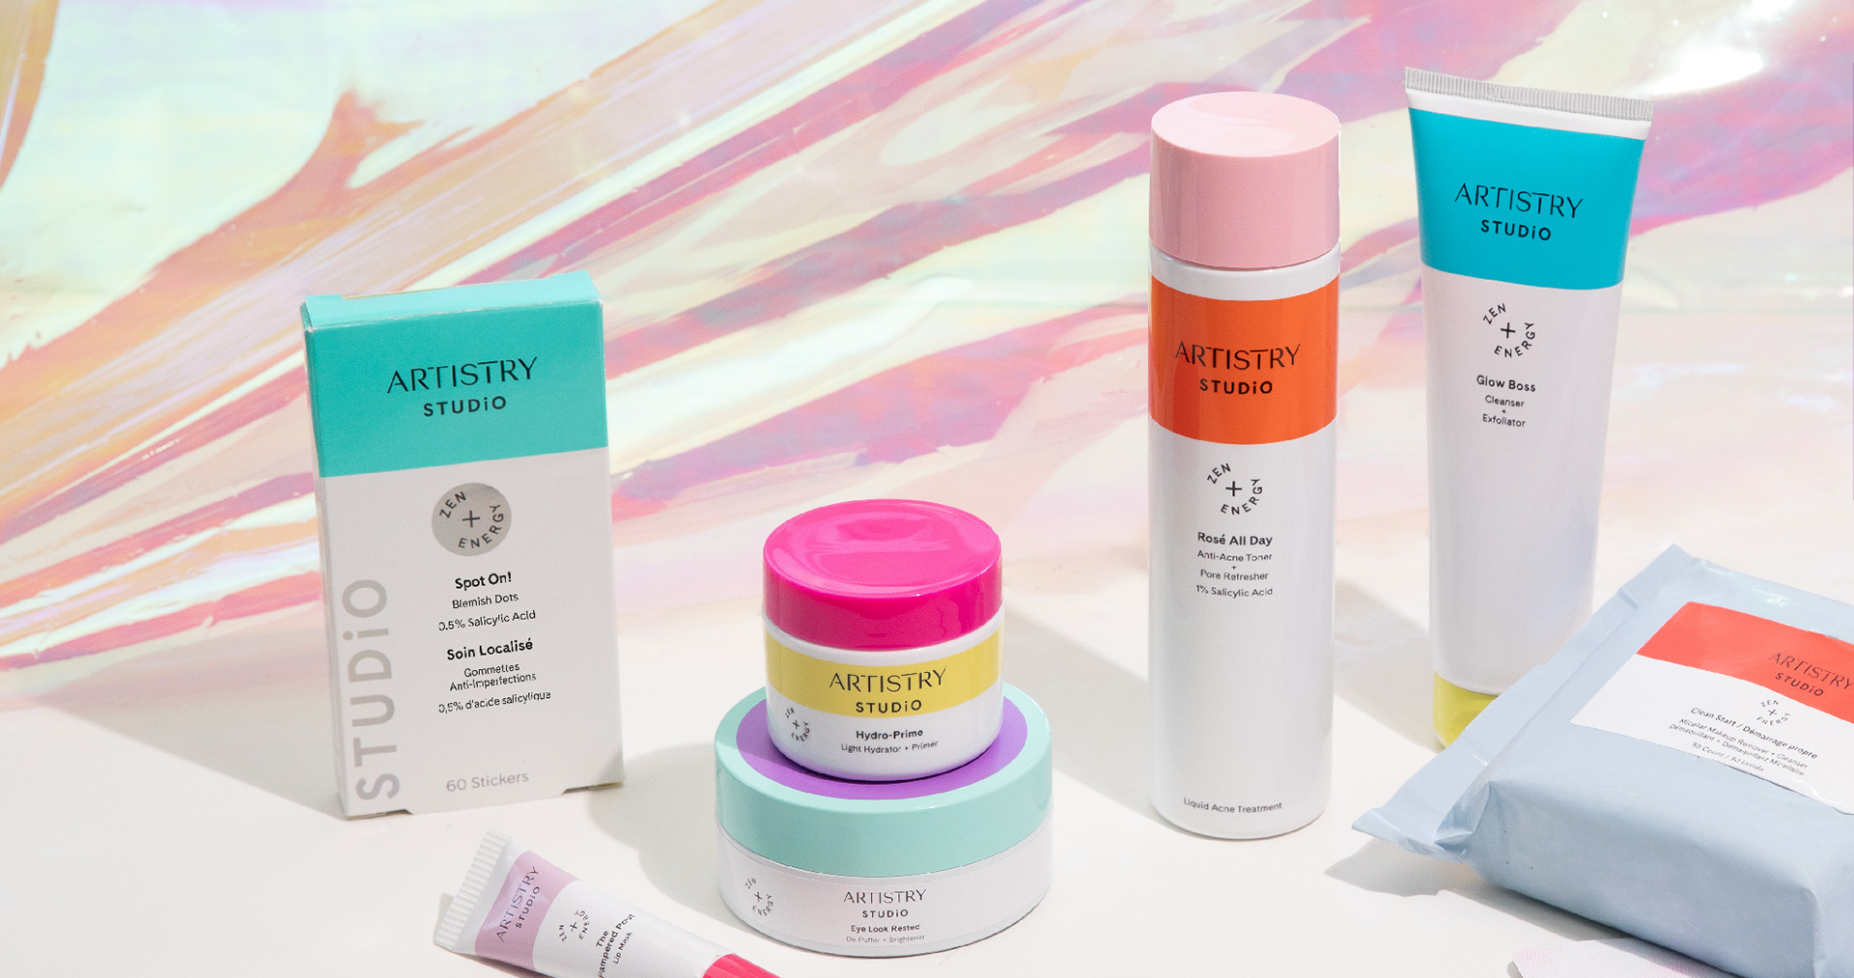 Amway Artistry Studio products